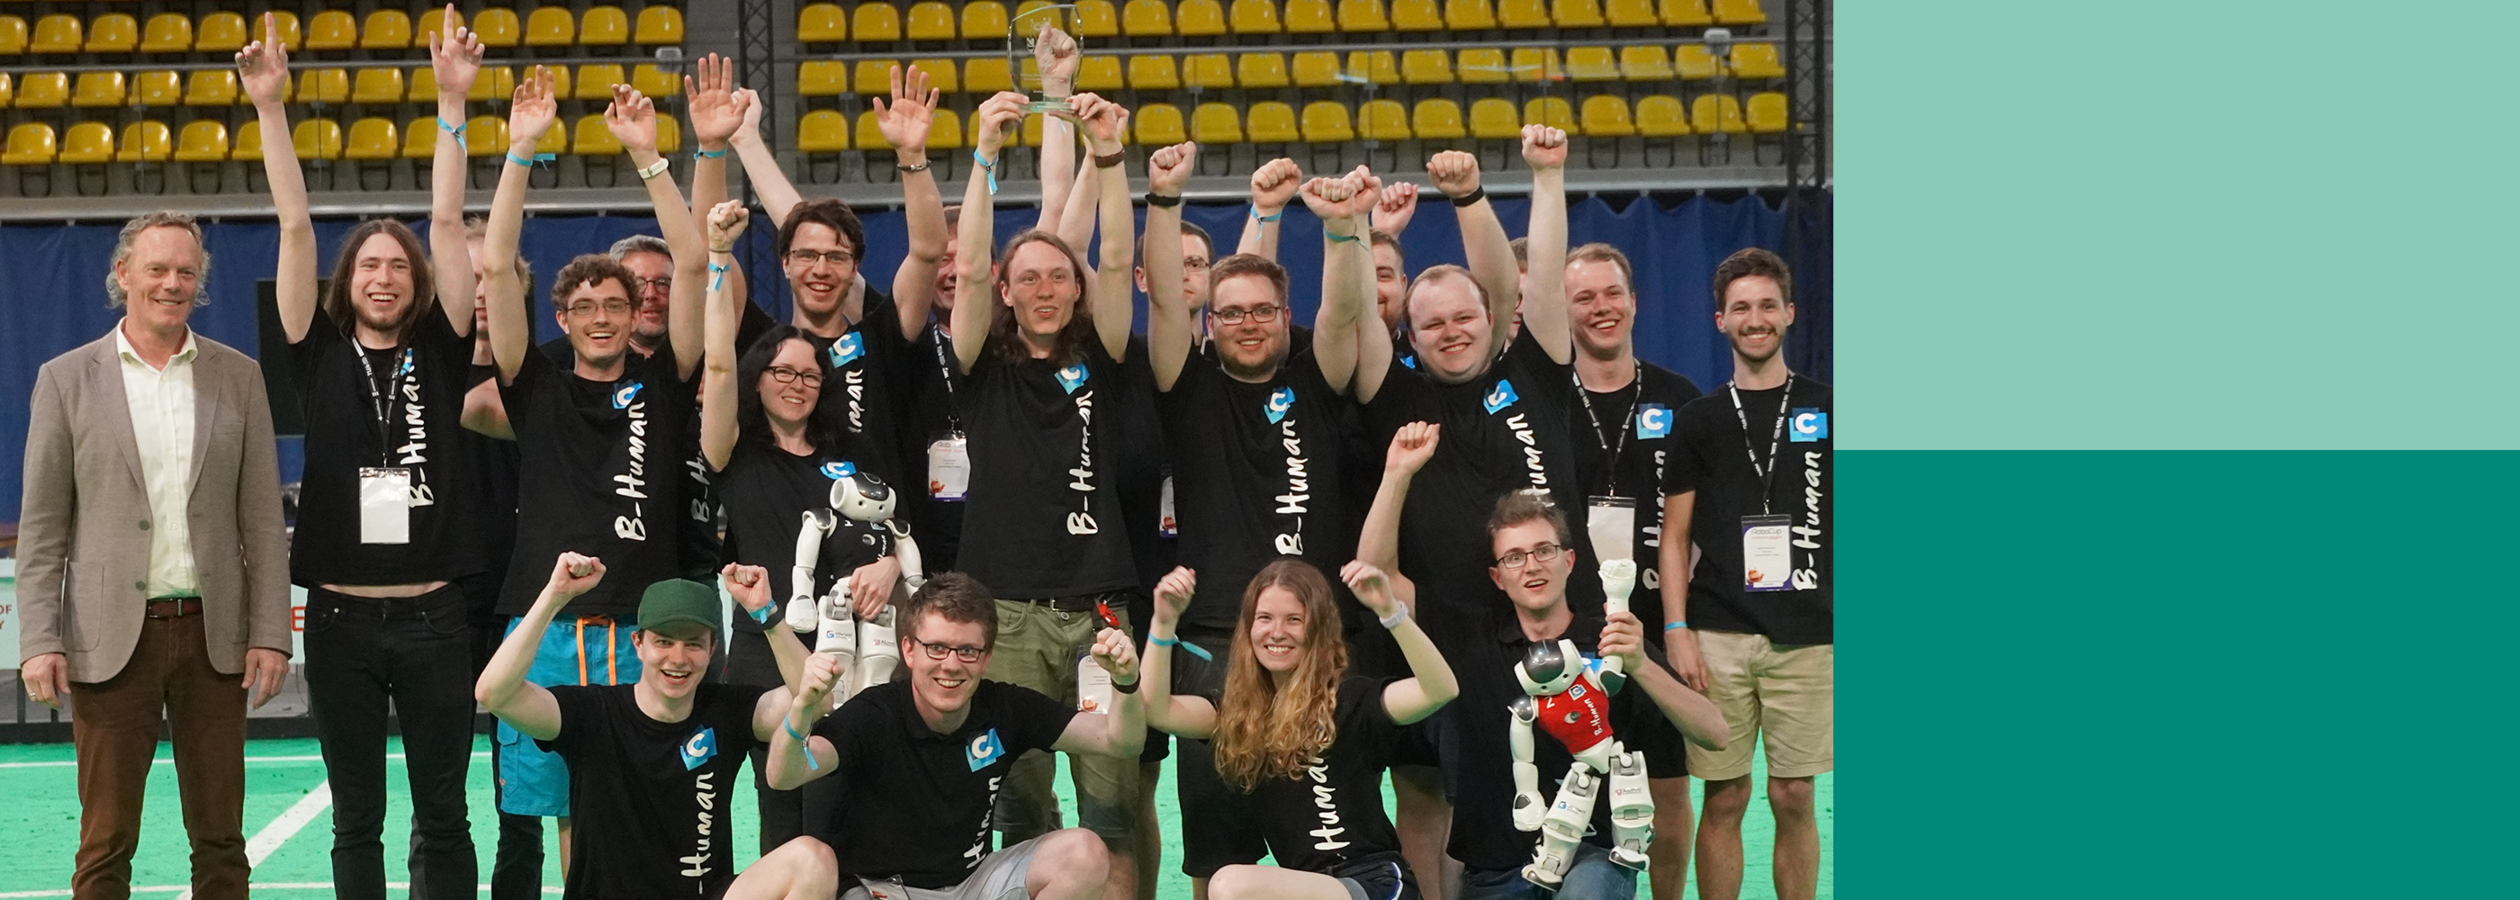 B-Human group photo with two robots